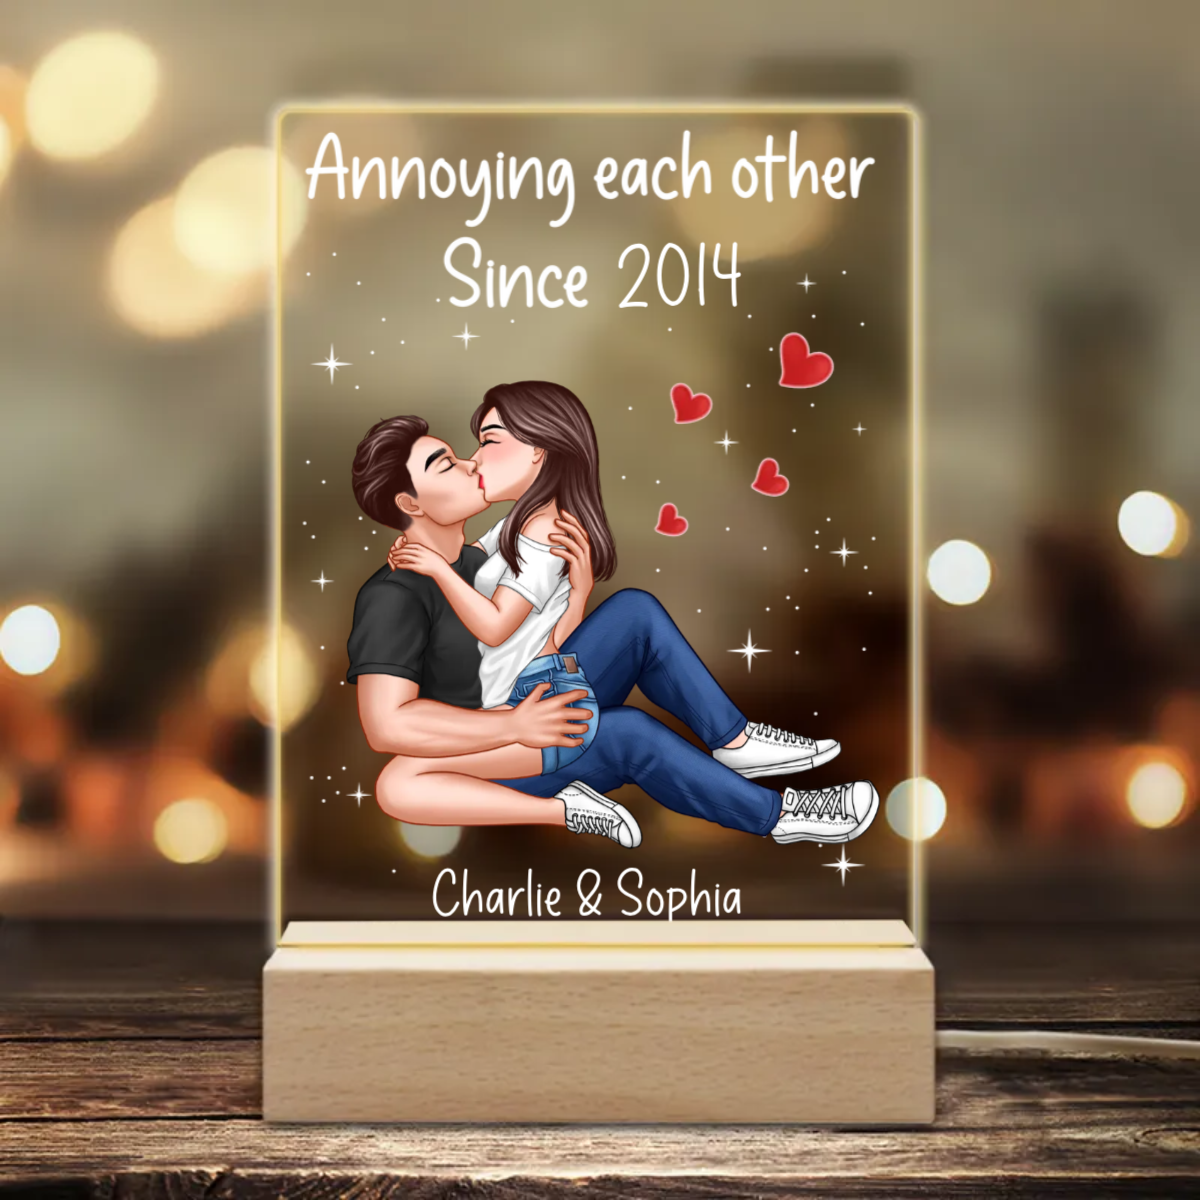 Sexy Couple Kissing Personalized Rectangle Acrylic Plaque LED Night Light